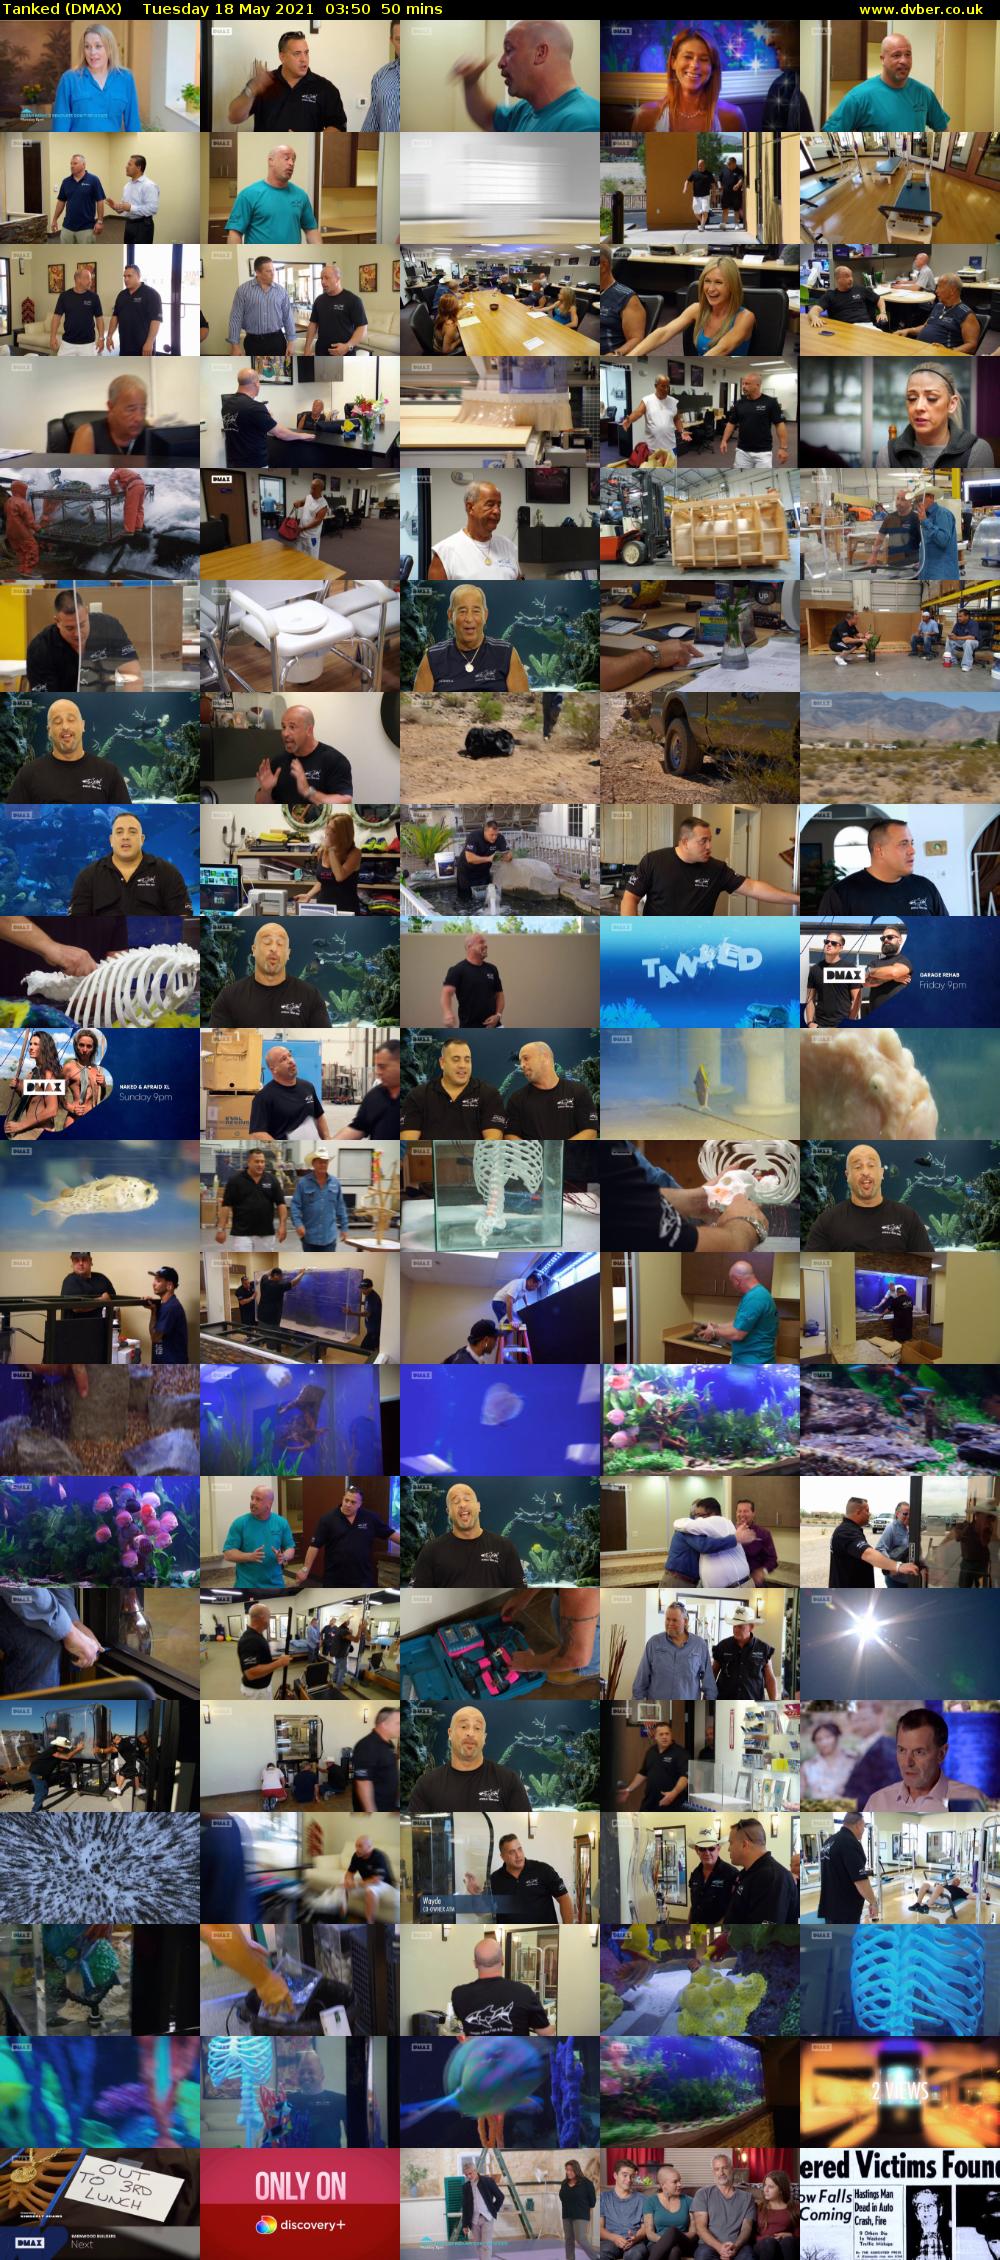 Tanked (DMAX) Tuesday 18 May 2021 03:50 - 04:40